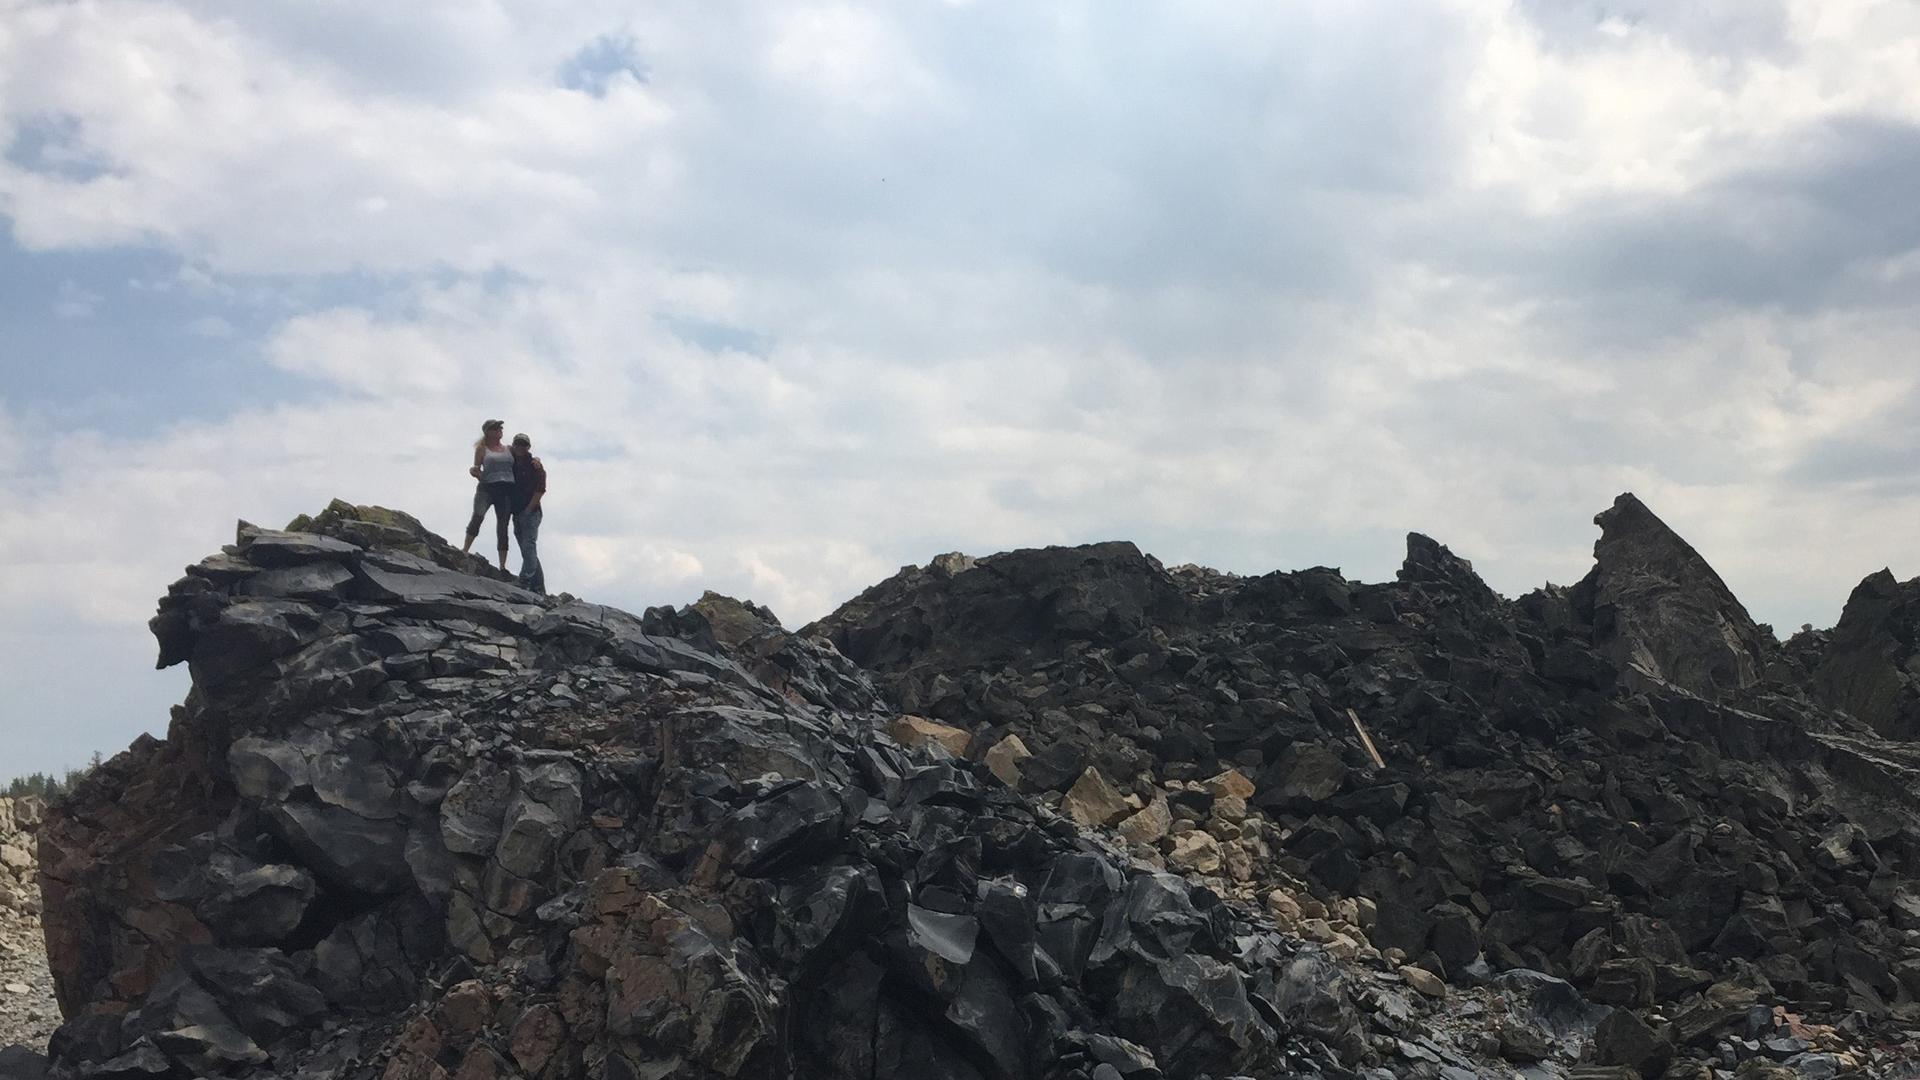 Tina and Tom Sjogren have been hiking around the lunar-like landscape of Obsidian Dome as part of their DIY preparation for space exploration.